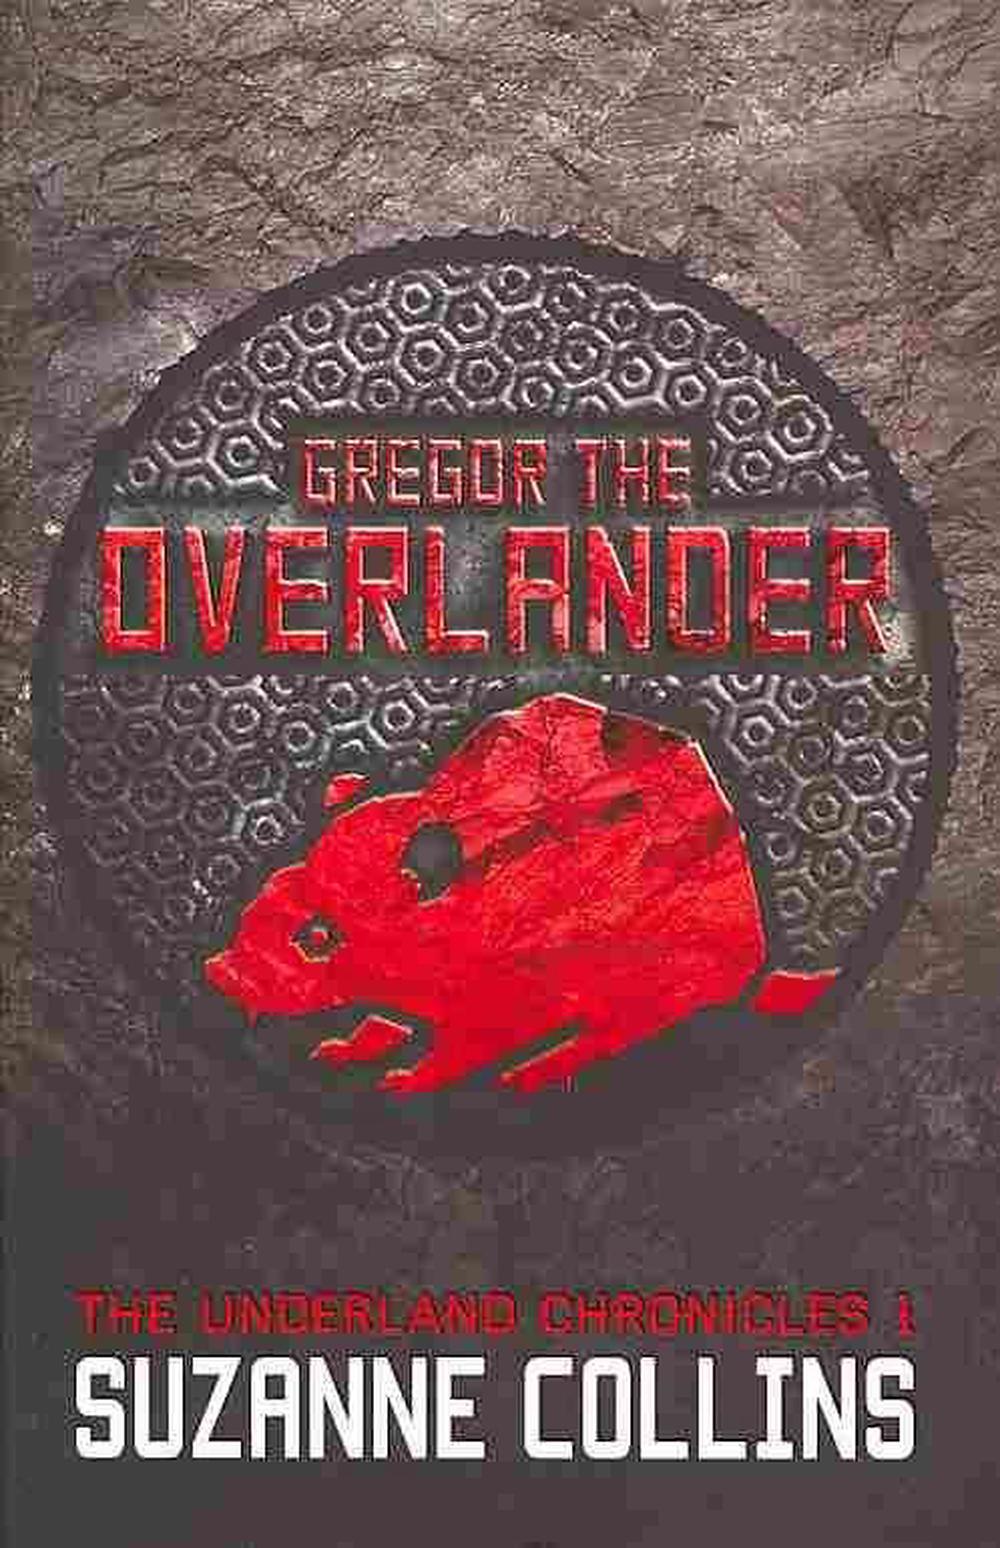 gregor the overlander collection books 1 5 suzanne collins